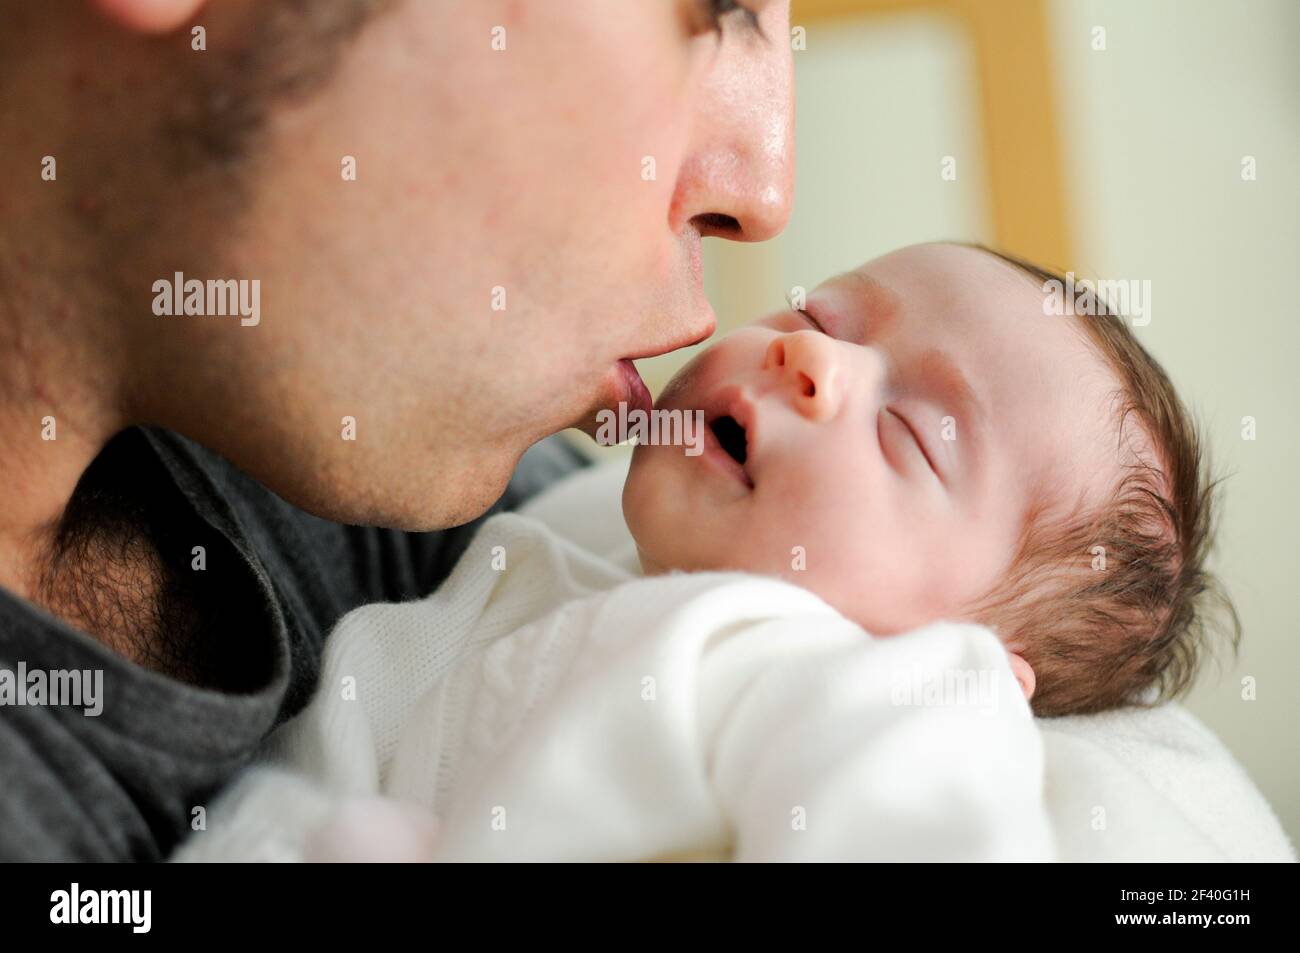 Father kissing his newborn baby girl. Close-up portrait Stock Photo